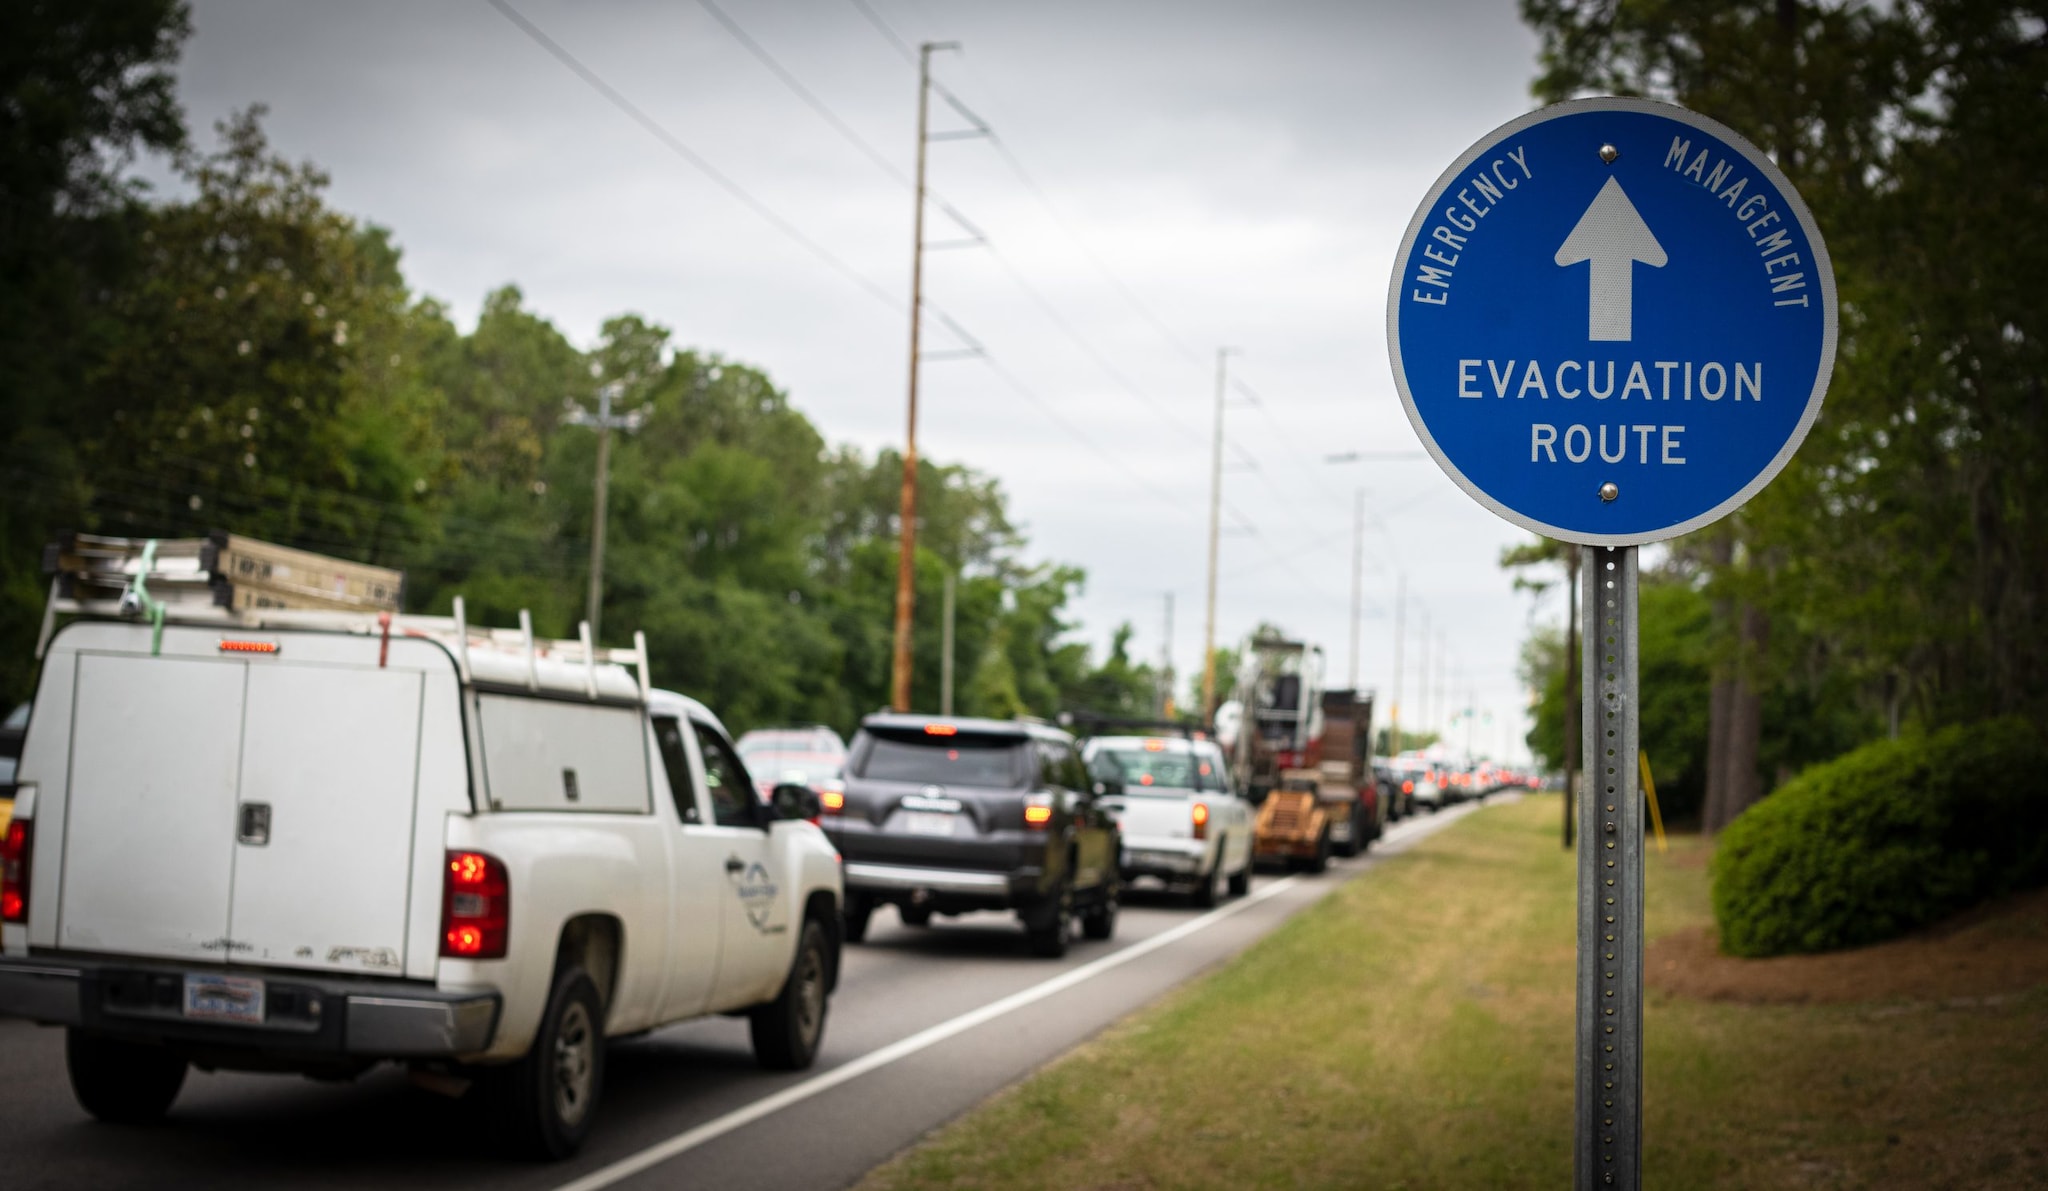 Cars on a road marked as an evacuation route